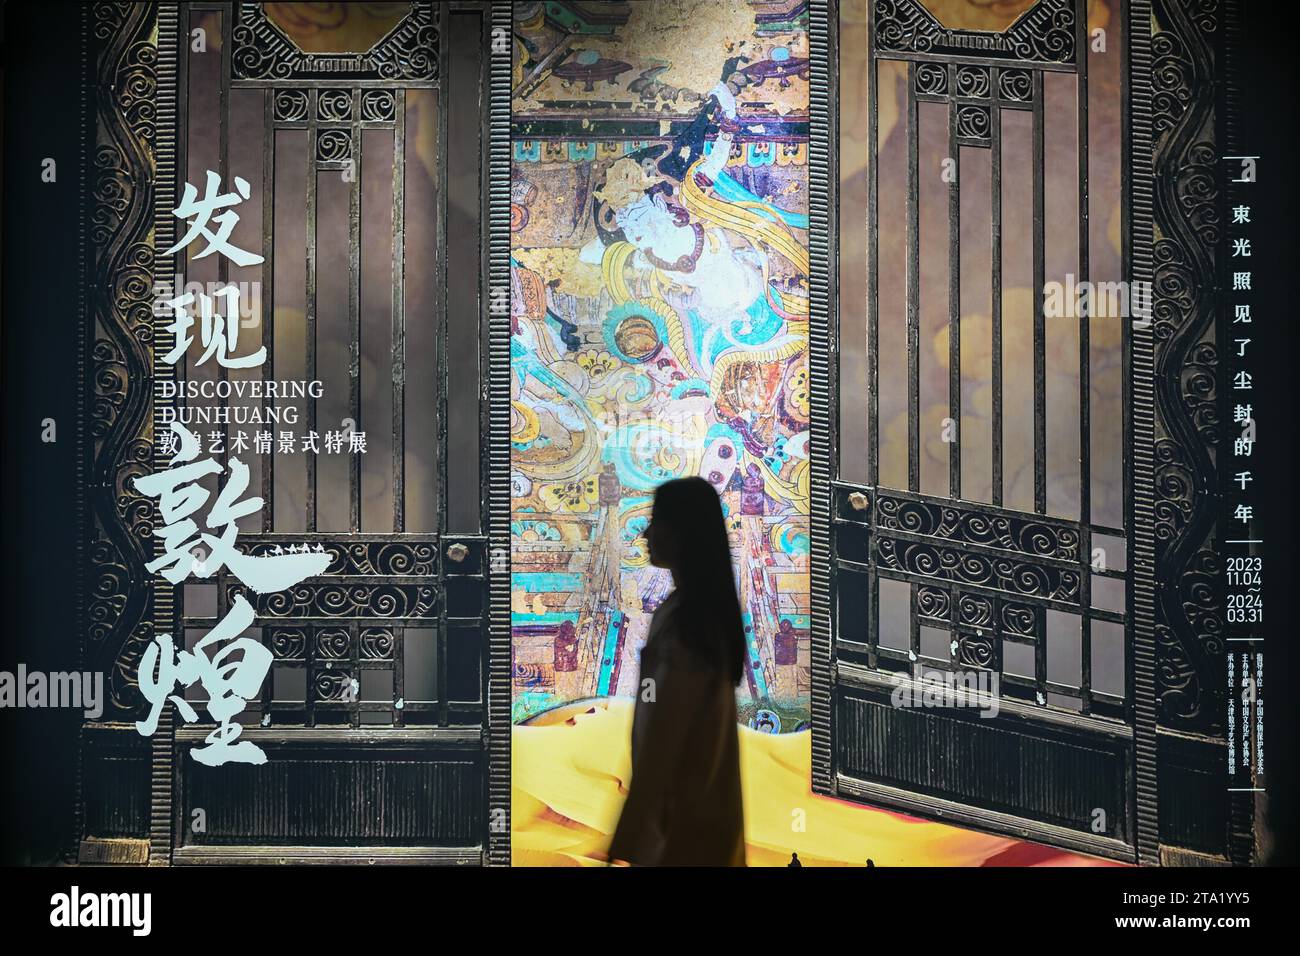 (231128) -- TIANJIN, Nov. 28, 2023 (Xinhua) -- A visitor views exhibits at an exhibition themed on Dunhuang culture at the Tianjin Digital Art Museum in Tianjin, north China, Nov. 28, 2023. The exhibition will last until March 2024. (Xinhua/Sun Fanyue) Stock Photo